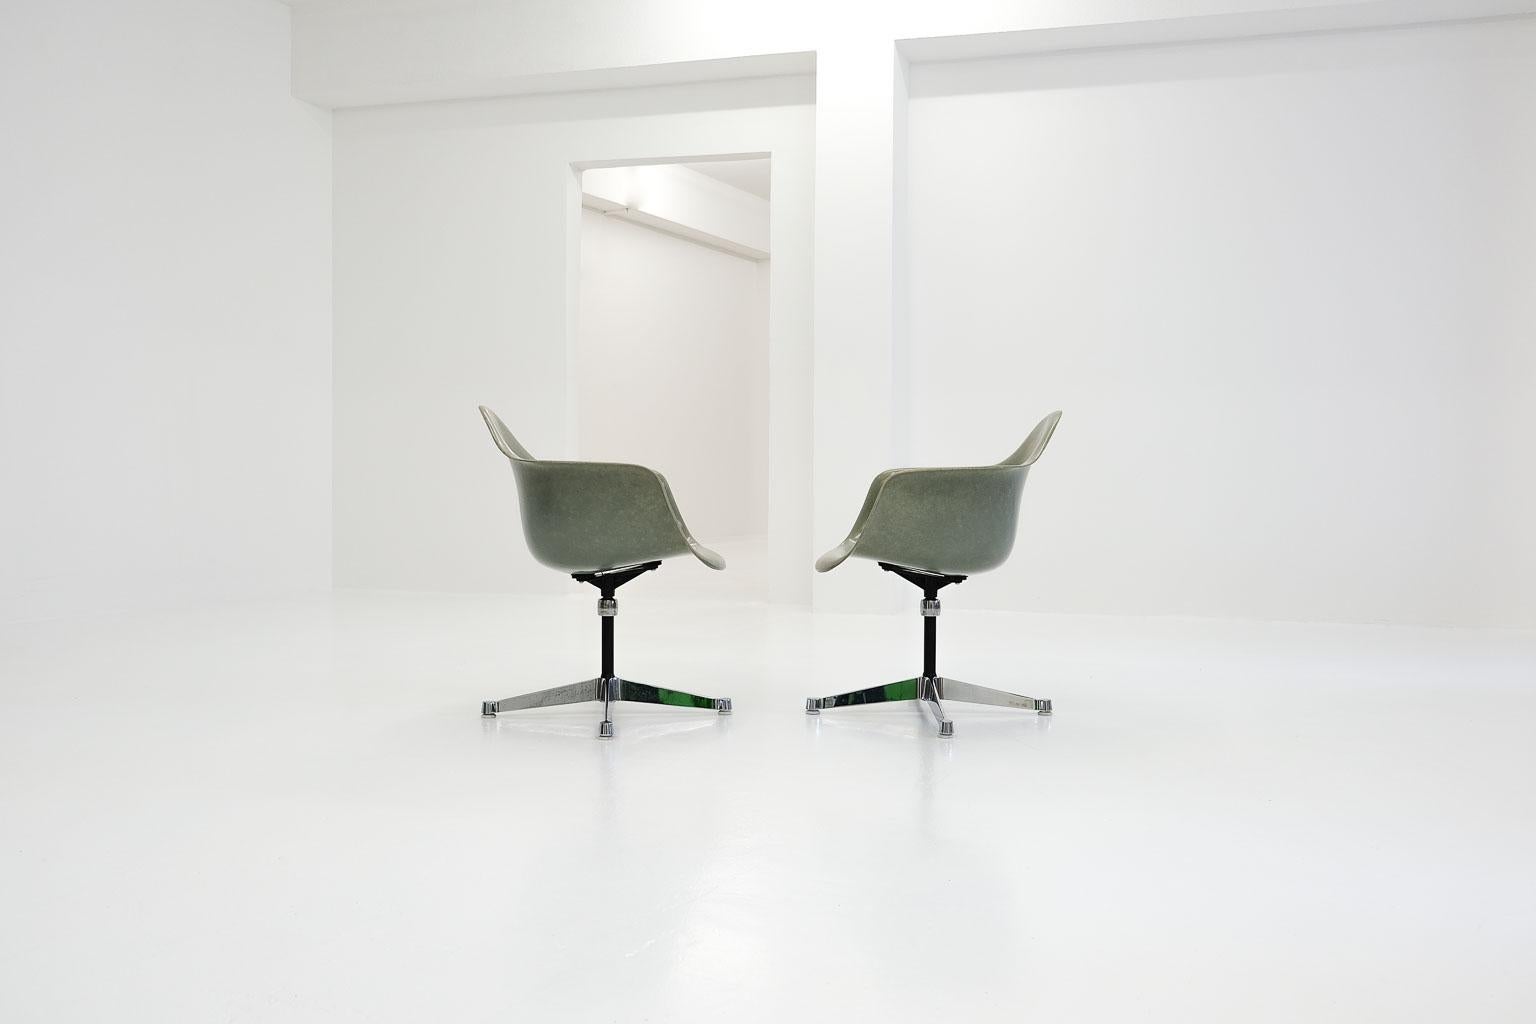 American PAC (pivot armchair contract base - adjustable), Charles Eames for Herman Miller